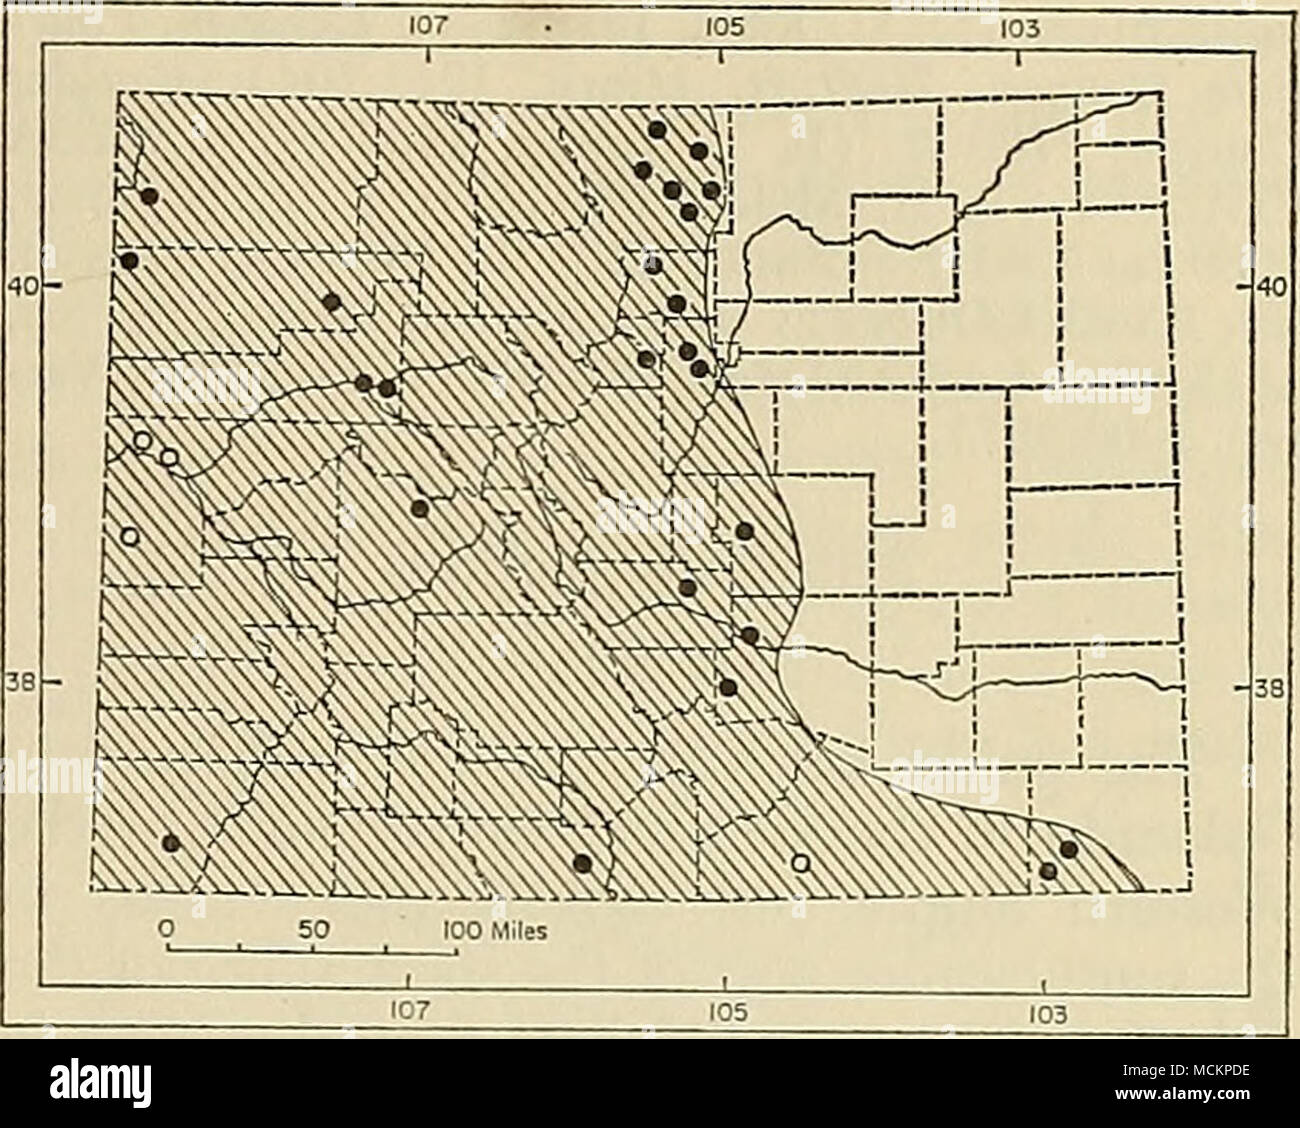 . Fig. 29. Distribution of Plecotus townsendii pal- lescens in Colorado. For explanation of symbols, see p. 9. Records of occurrence.—Specimens examined, 92, distributed as follows: MOFFAT COUNTY: Castle Park, Dinosaur National Monument, 1 (CU). LARI- MER COUNTY: Cherokee Park, 1 (CU); 5 mi. NW Livermore, 6700 ft., 1 (CSU); 34 mi. NW Fort Col- lins, 1 (CSU); 22 mi. NW Fort Collins, 1 (CSU); limestone cave, Owl Canyon, 2 (CSU); 1/4 mi. N Owl Canyon Store, 1 (CSU); 20 mi. NW Fort Col- lins, 1 (CSU); 9 mi. N, 5 mi. W Fort Collins, 5300 ft., 1 (CSU); sec. 20, T. 9 N, R. 73 W, 1 (CSU); Rustic, 8000 Stock Photo